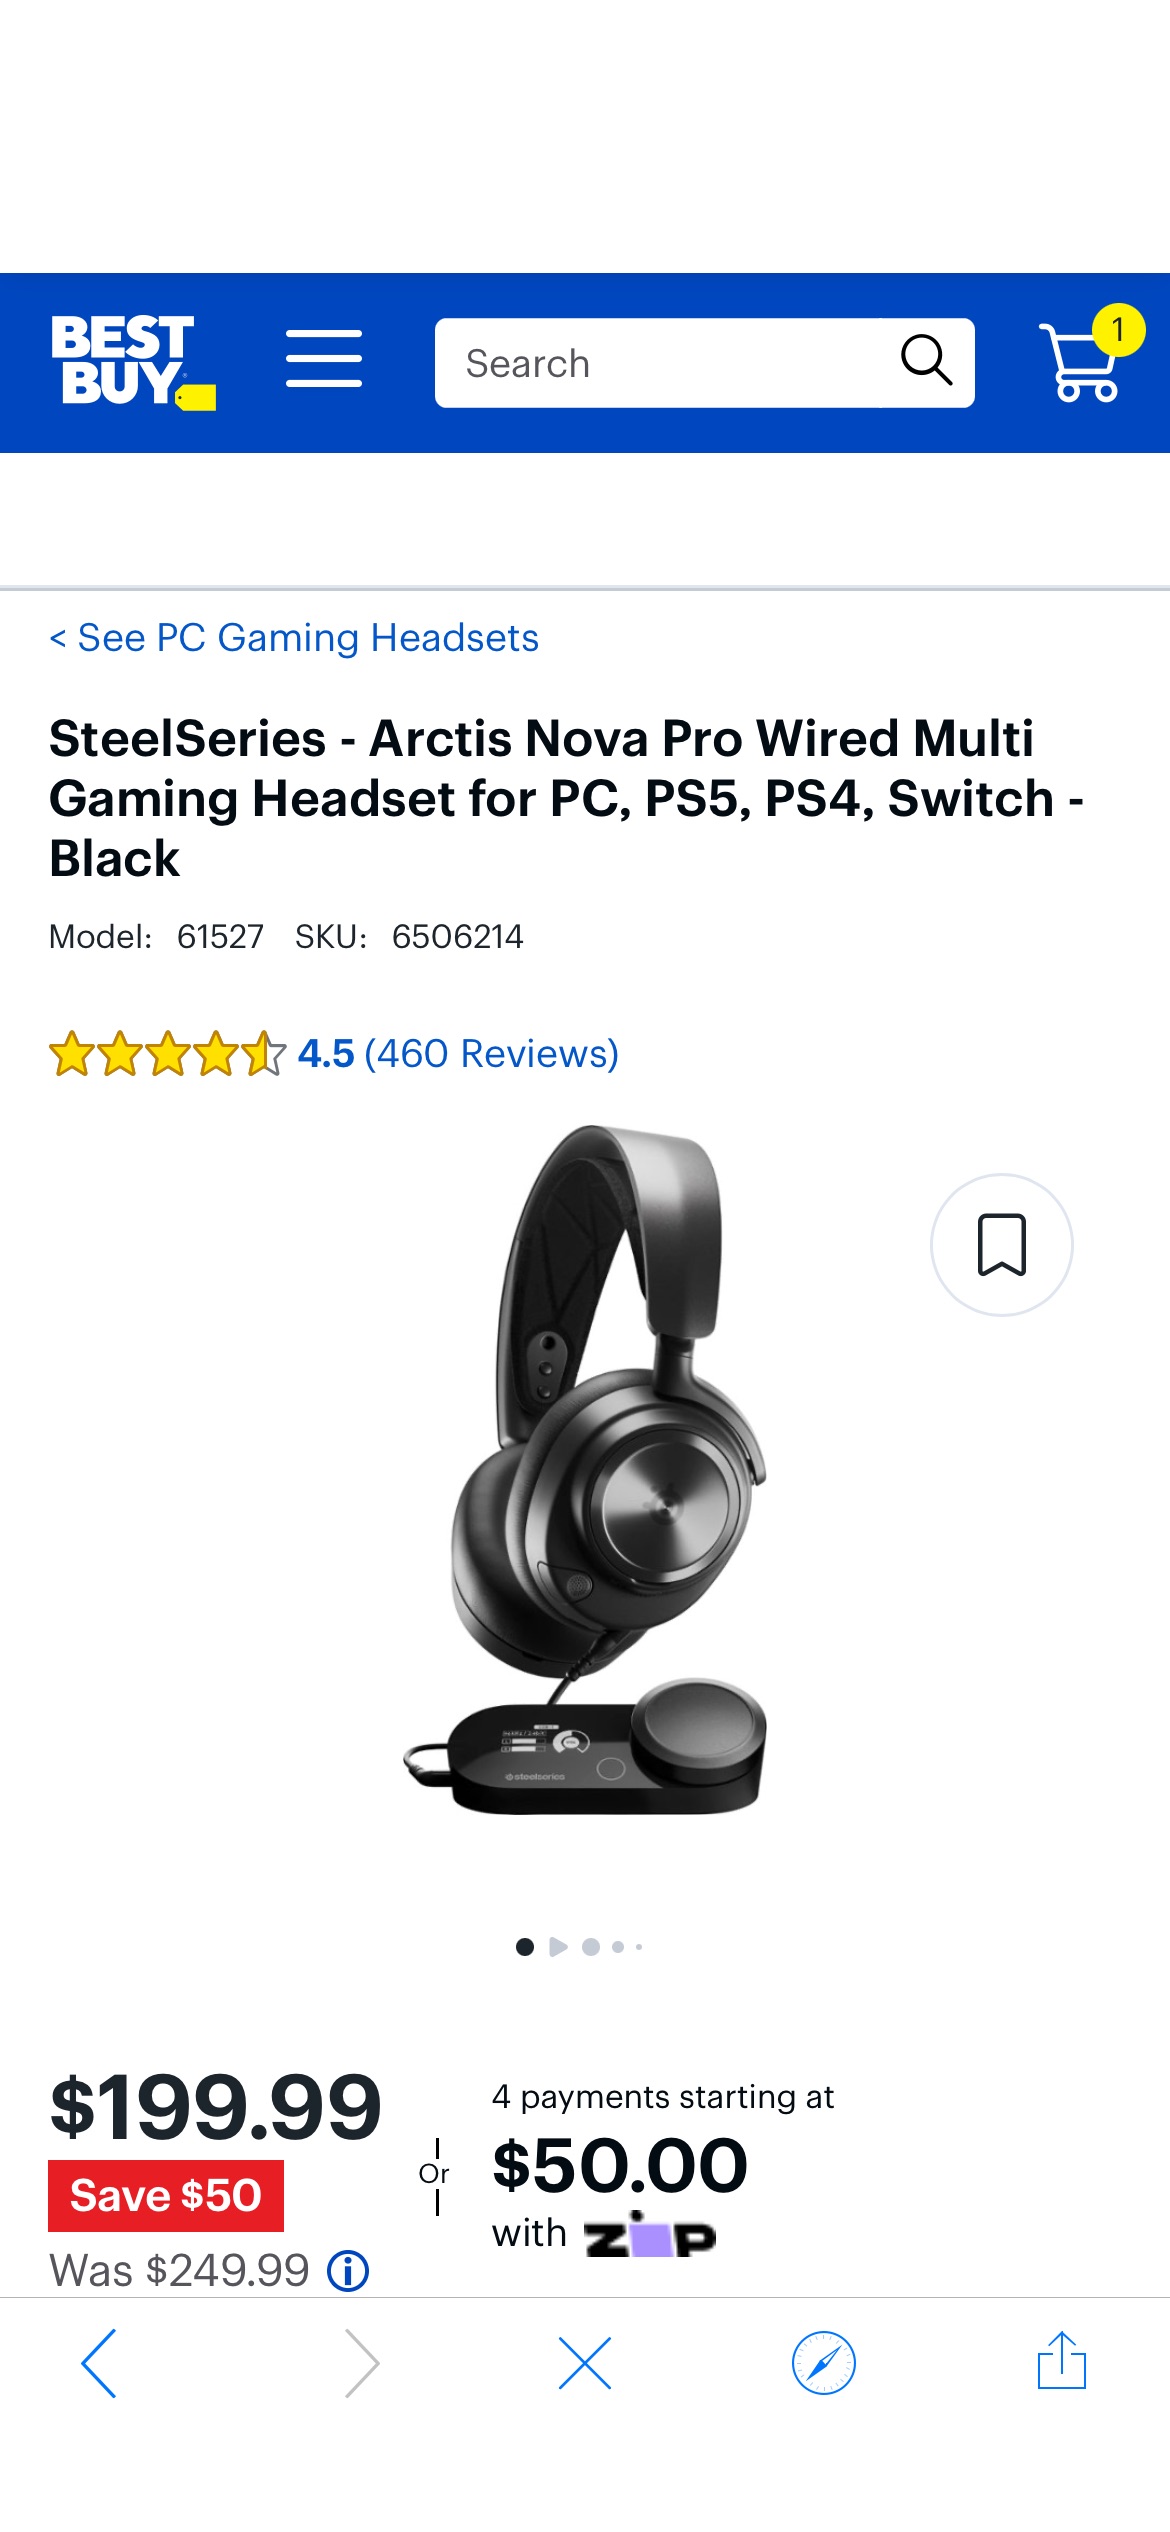 SteelSeries Arctis Nova Pro Wired Multi Gaming Headset for PC, PS5, PS4, Switch Black 61527 - Best Buy